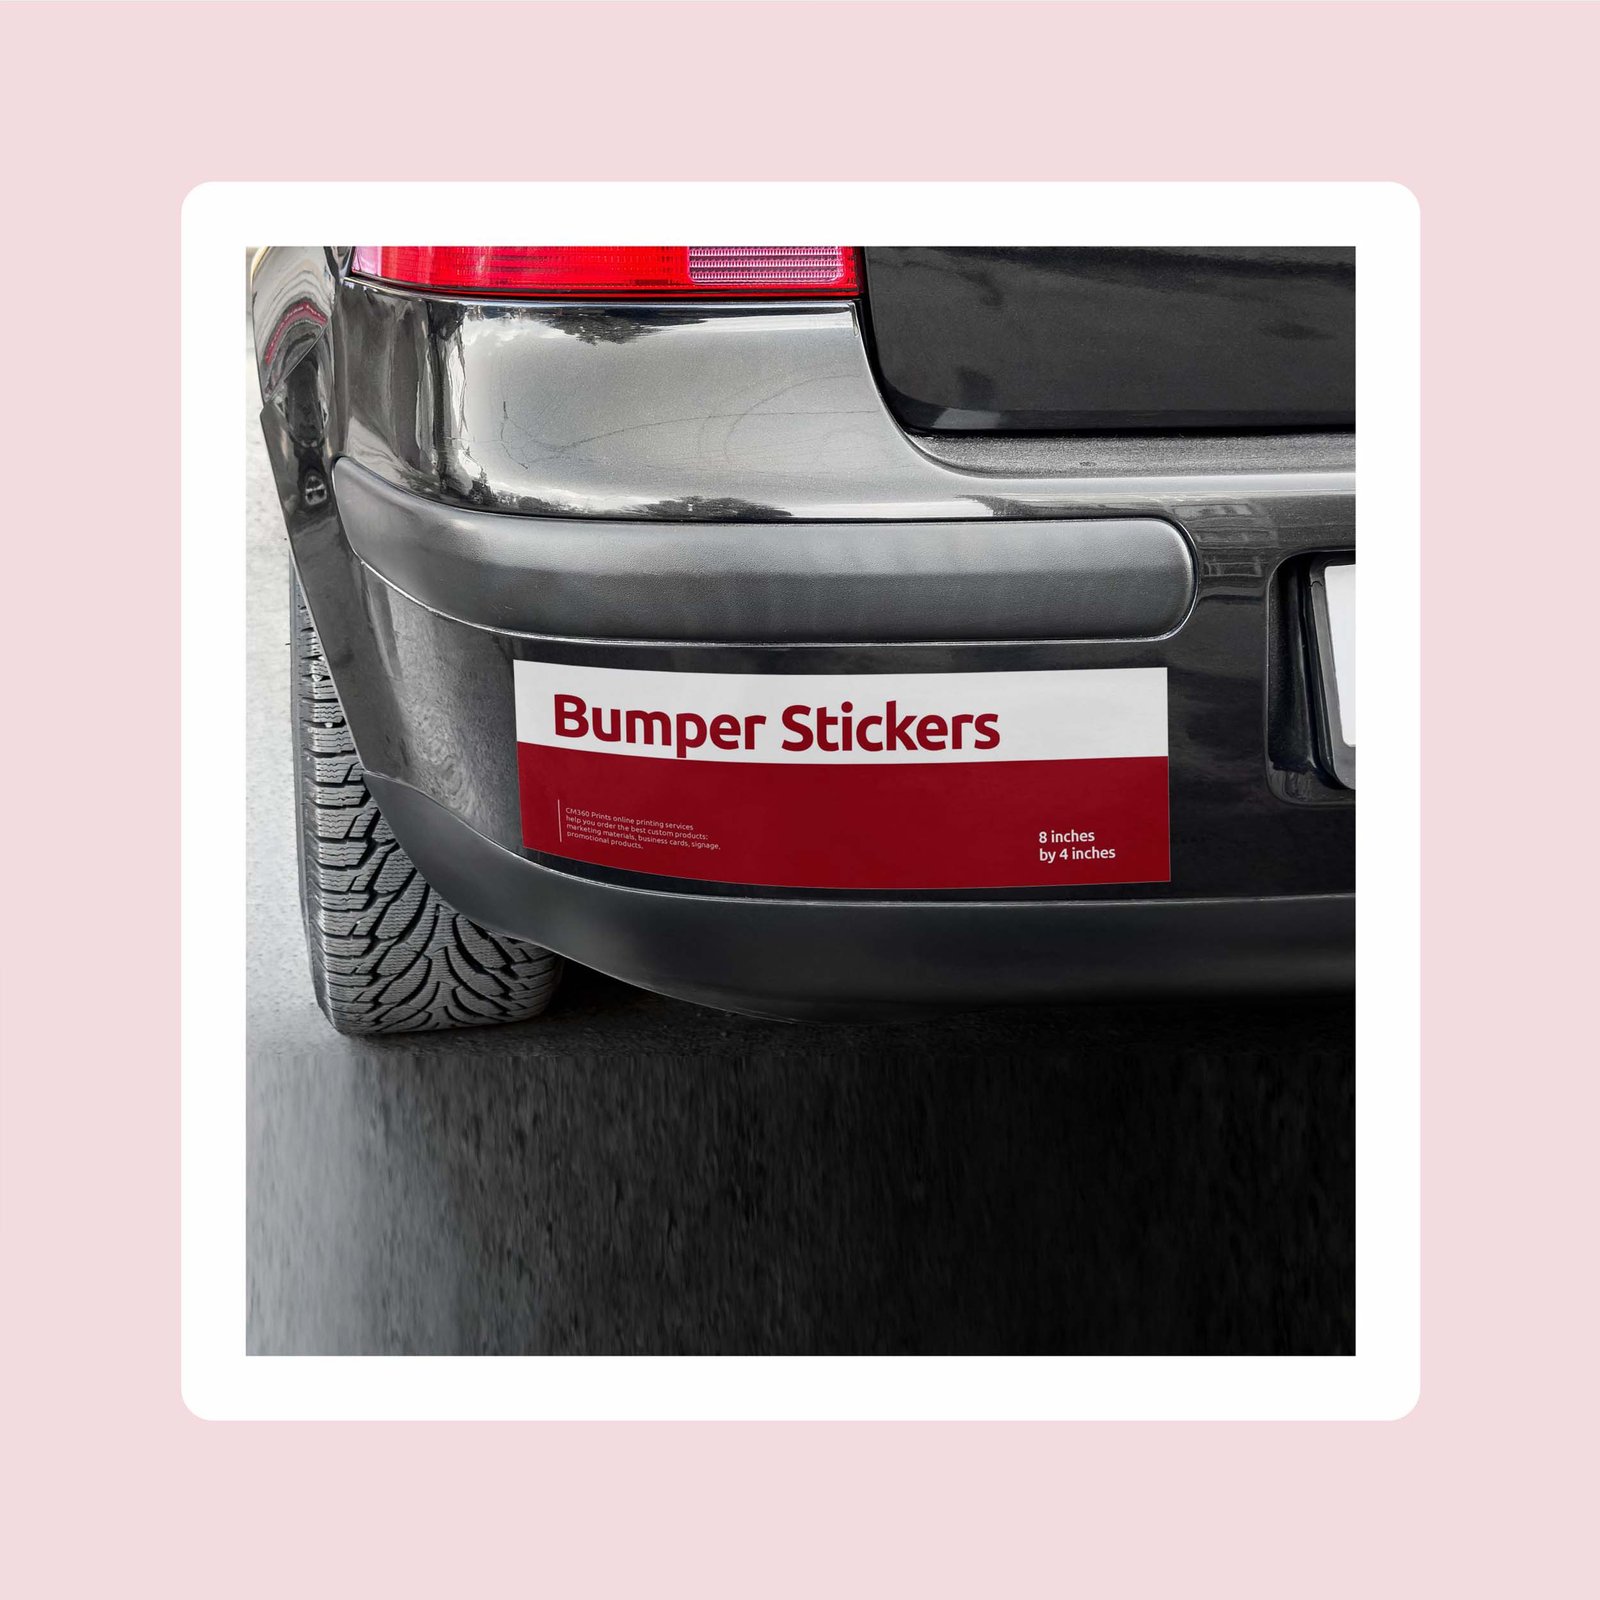 Magnetic Car Sticker Printers in Nigeria, Where to Buy Labels in Lagos